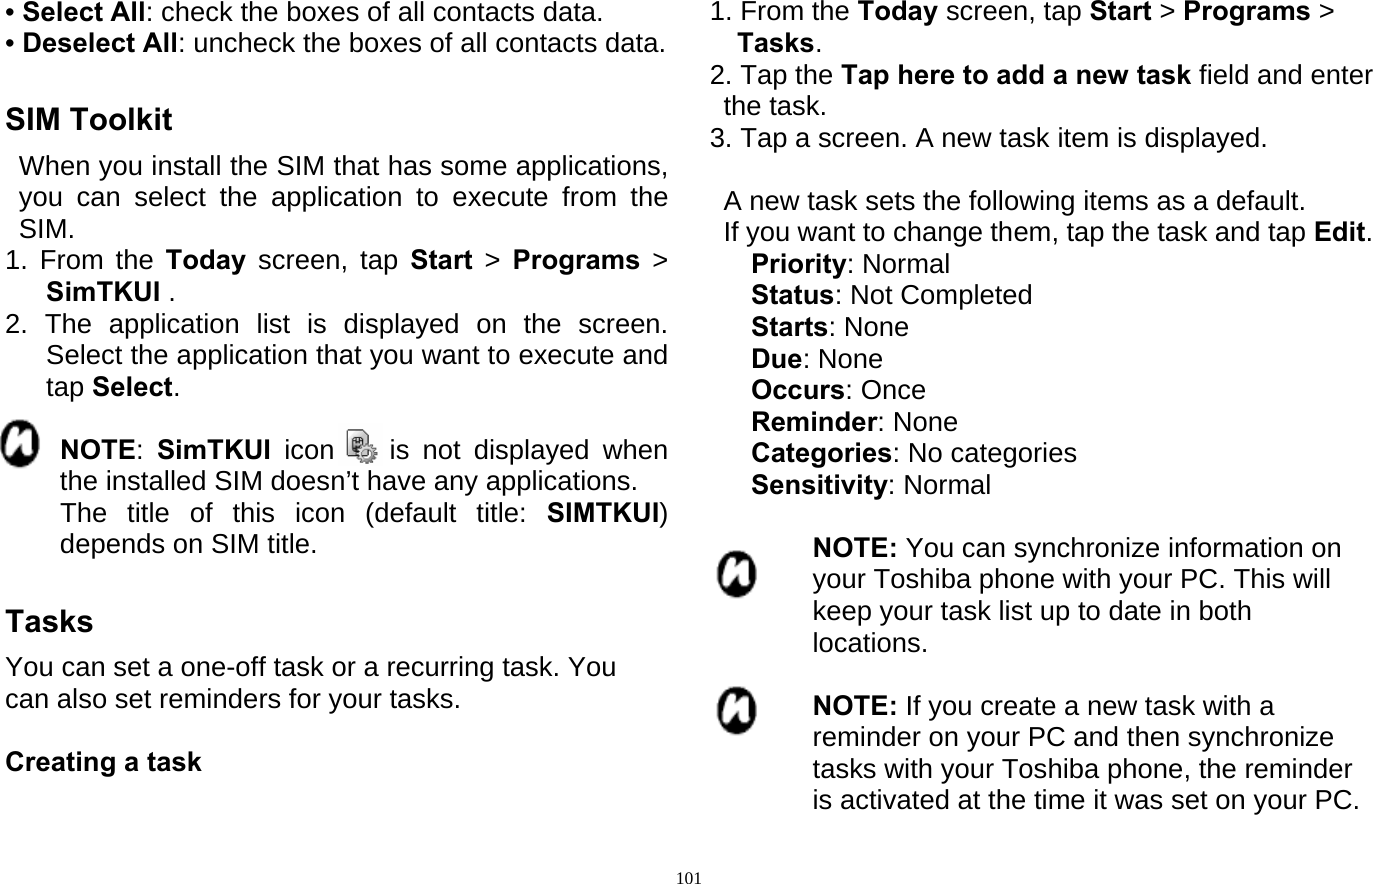  101• Select All: check the boxes of all contacts data. • Deselect All: uncheck the boxes of all contacts data.  SIM Toolkit   When you install the SIM that has some applications, you can select the application to execute from the SIM. 1. From the Today  screen, tap Start  &gt;  Programs &gt; SimTKUI . 2. The application list is displayed on the screen. Select the application that you want to execute and tap Select.         NOTE:  SimTKUI icon    is not displayed when the installed SIM doesn’t have any applications.     The title of this icon (default title: SIMTKUI) depends on SIM title.  Tasks You can set a one-off task or a recurring task. You can also set reminders for your tasks.  Creating a task  1. From the Today screen, tap Start &gt; Programs &gt;  Tasks. 2. Tap the Tap here to add a new task field and enter the task. 3. Tap a screen. A new task item is displayed.    A new task sets the following items as a default.   If you want to change them, tap the task and tap Edit.    Priority: Normal    Status: Not Completed    Starts: None    Due: None    Occurs: Once    Reminder: None    Categories: No categories    Sensitivity: Normal  NOTE: You can synchronize information on your Toshiba phone with your PC. This will keep your task list up to date in both locations.  NOTE: If you create a new task with a reminder on your PC and then synchronize tasks with your Toshiba phone, the reminder is activated at the time it was set on your PC. 